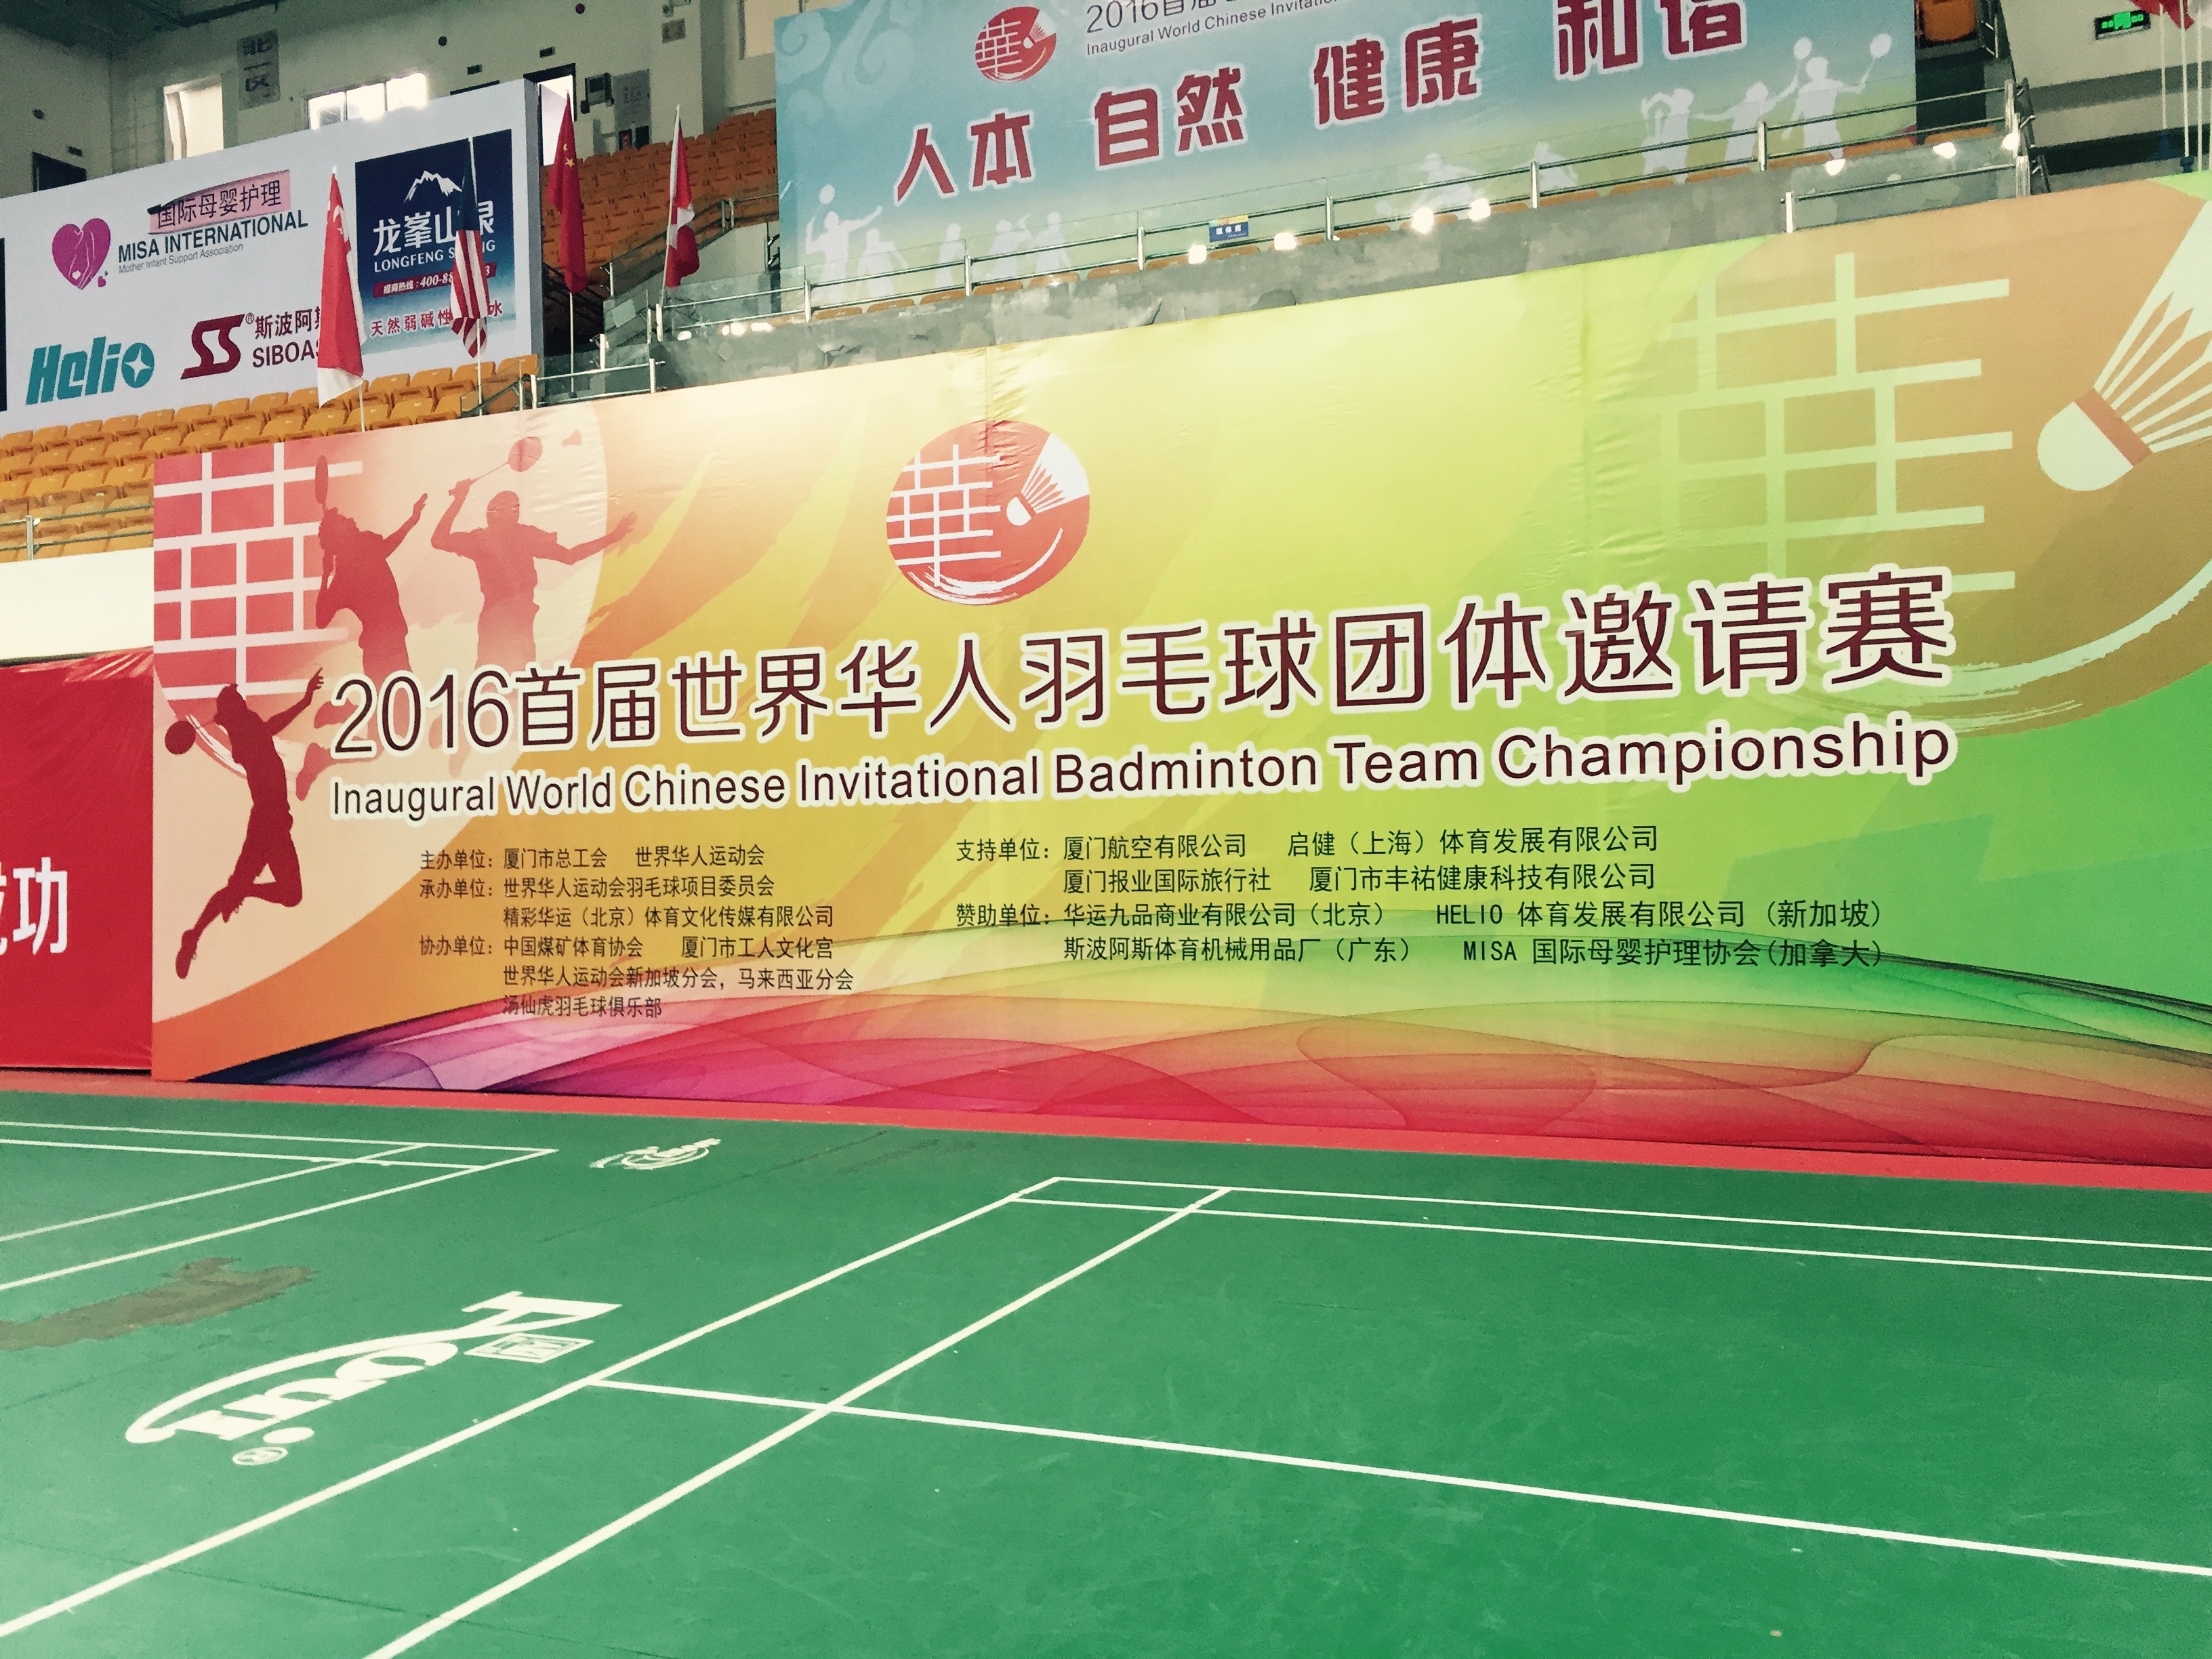 The name of this local Xiamen tournament is 